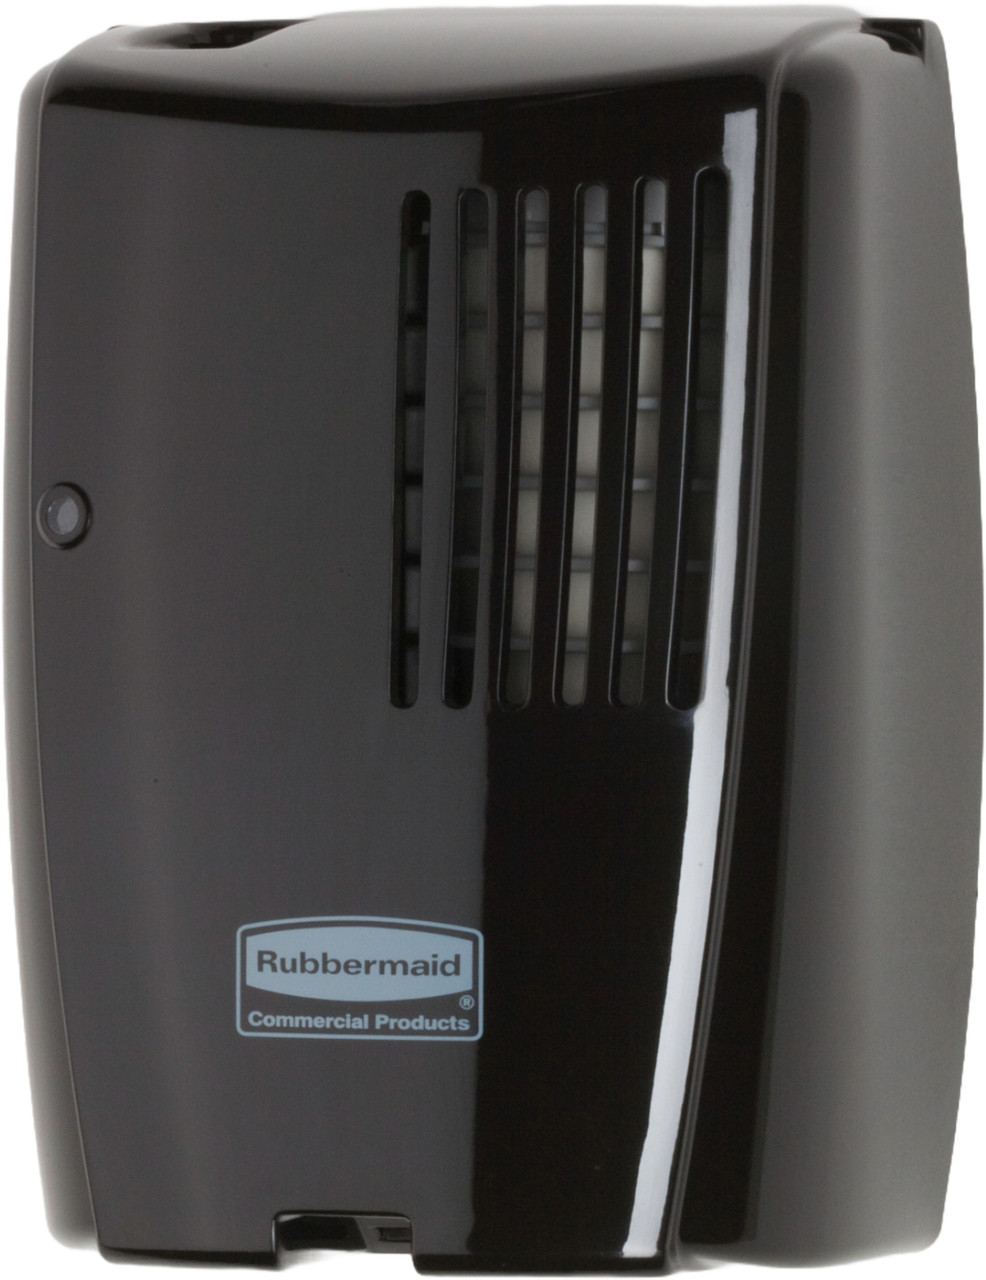 1817140 - Rubbermaid TCell Dispenser with Fan - Black